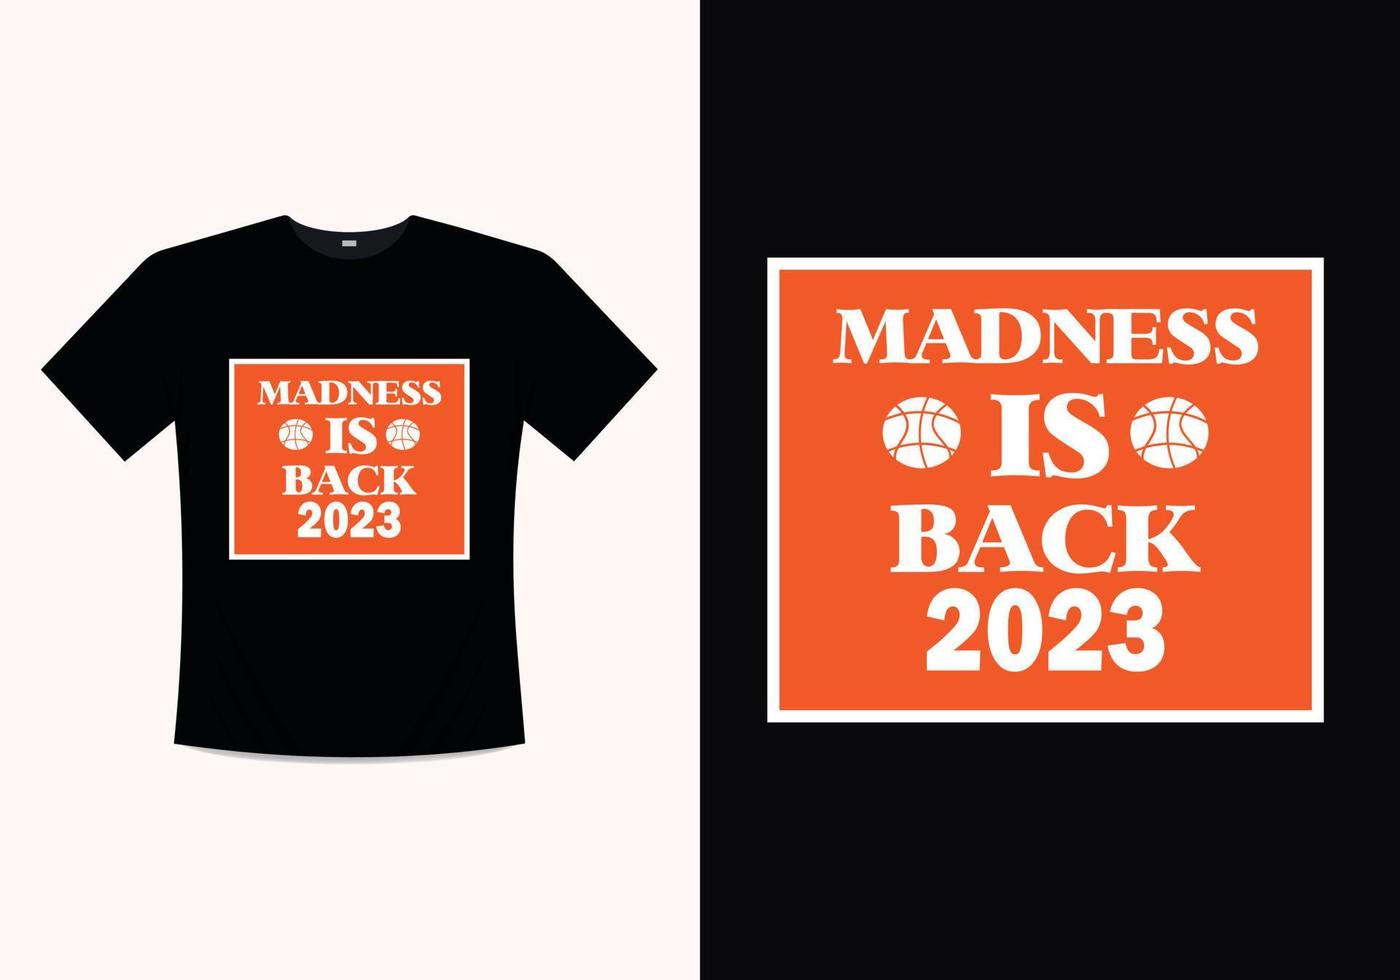 March Madness T-shirt Printable Template Design vector